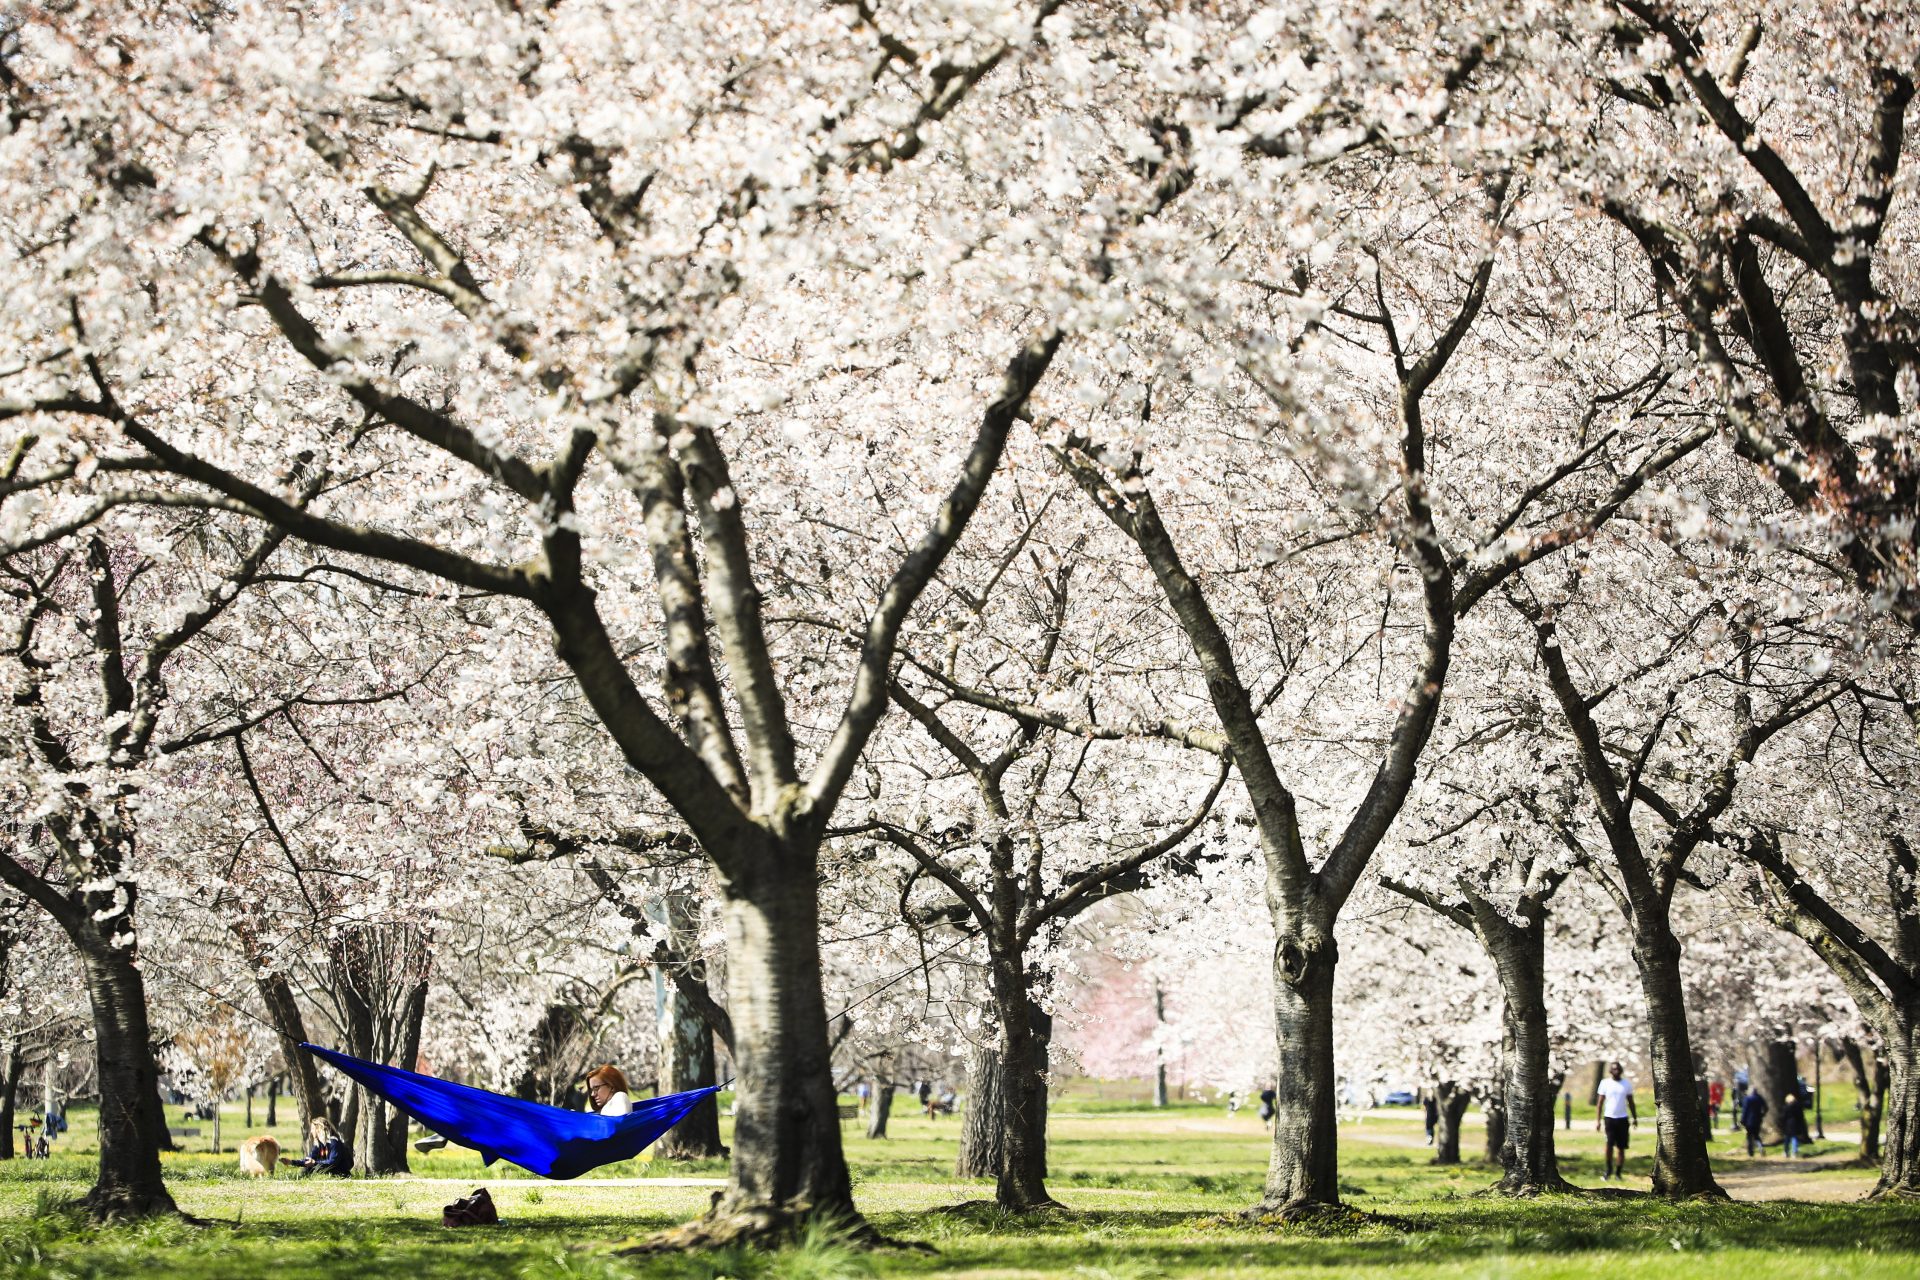 A woman relaxes in a hammock hanging amid cherry trees in full bloom along Kelly Drive in Philadelphia, Thursday, March 26, 2020. Mayor Jim Kenney has issued a stay-at-home order to the nation's sixth most-populated city to keep its residents from leaving home, except to get food, seek medical attention, exercise outdoors, go to a job classified as essential or other errands that involve personal and public safety.